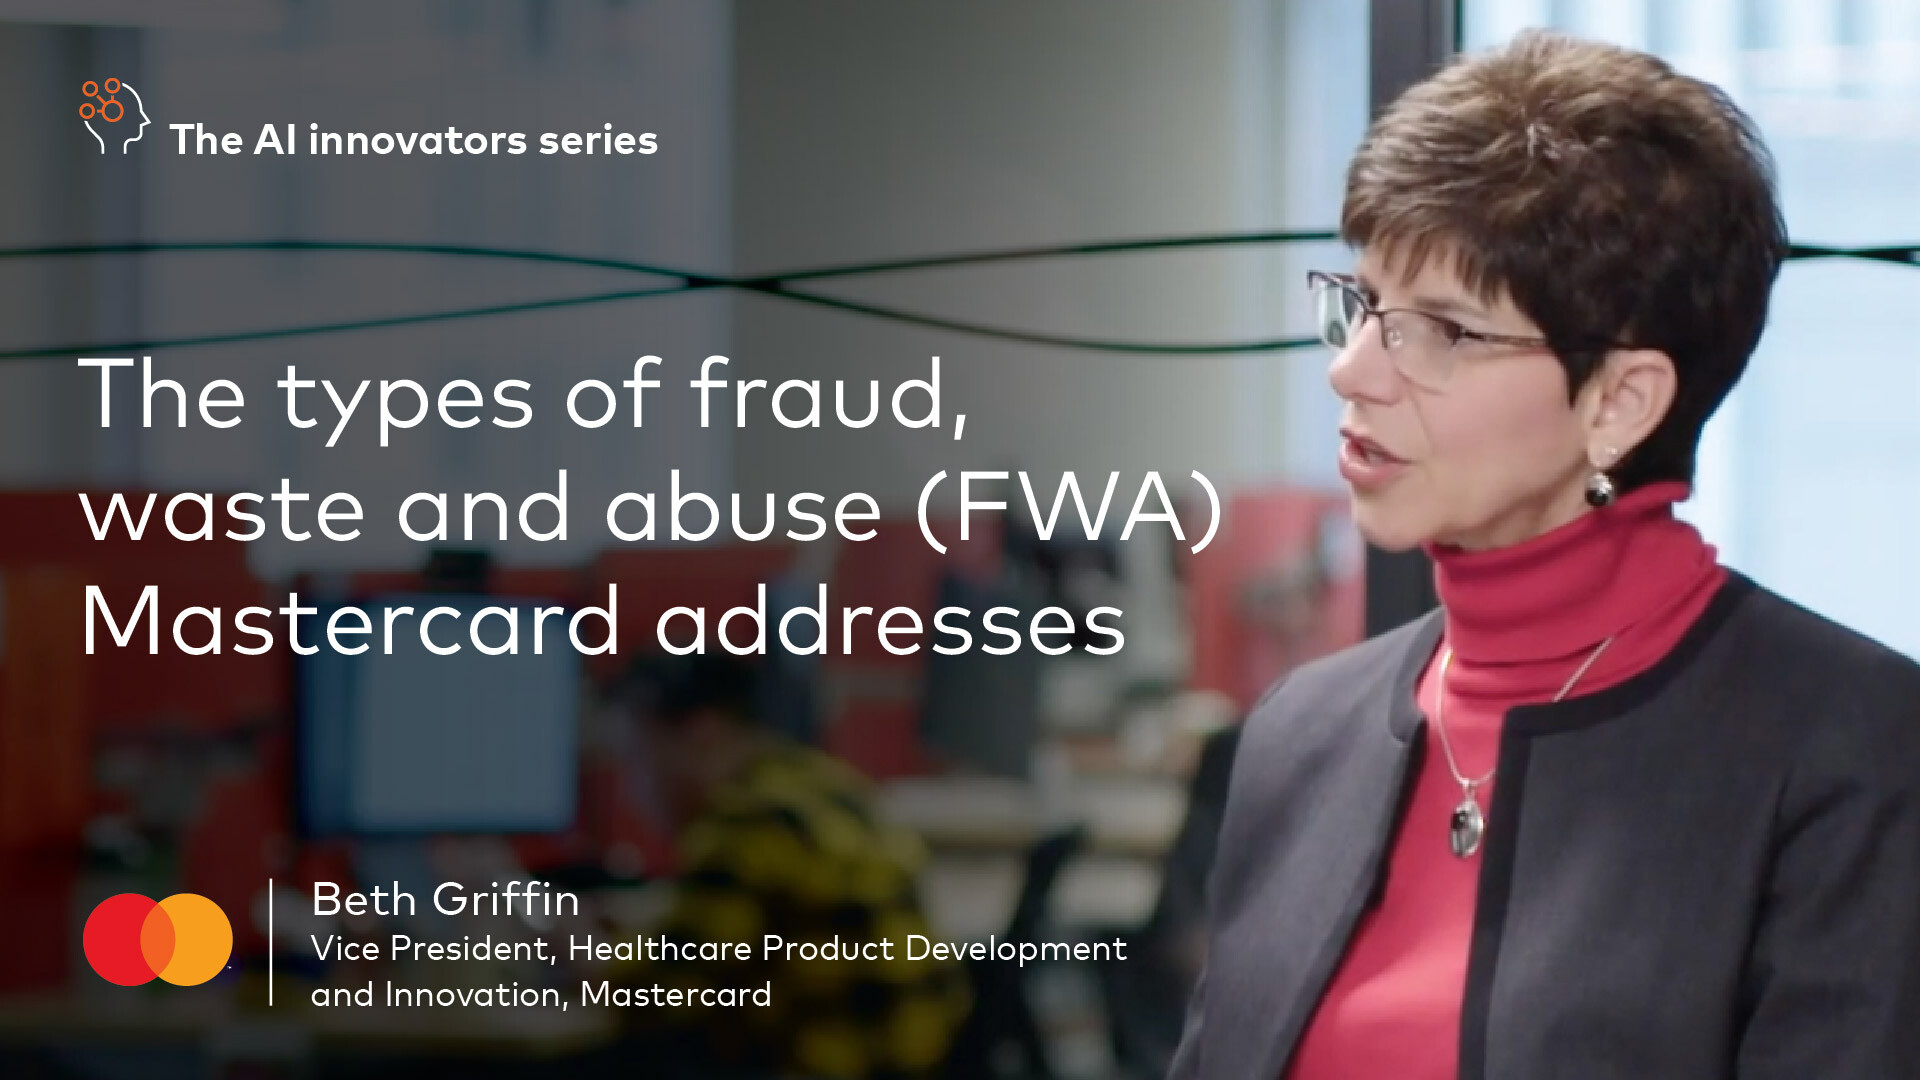 The types of fraud, waste and abuse (FWA) Mastercard addresses